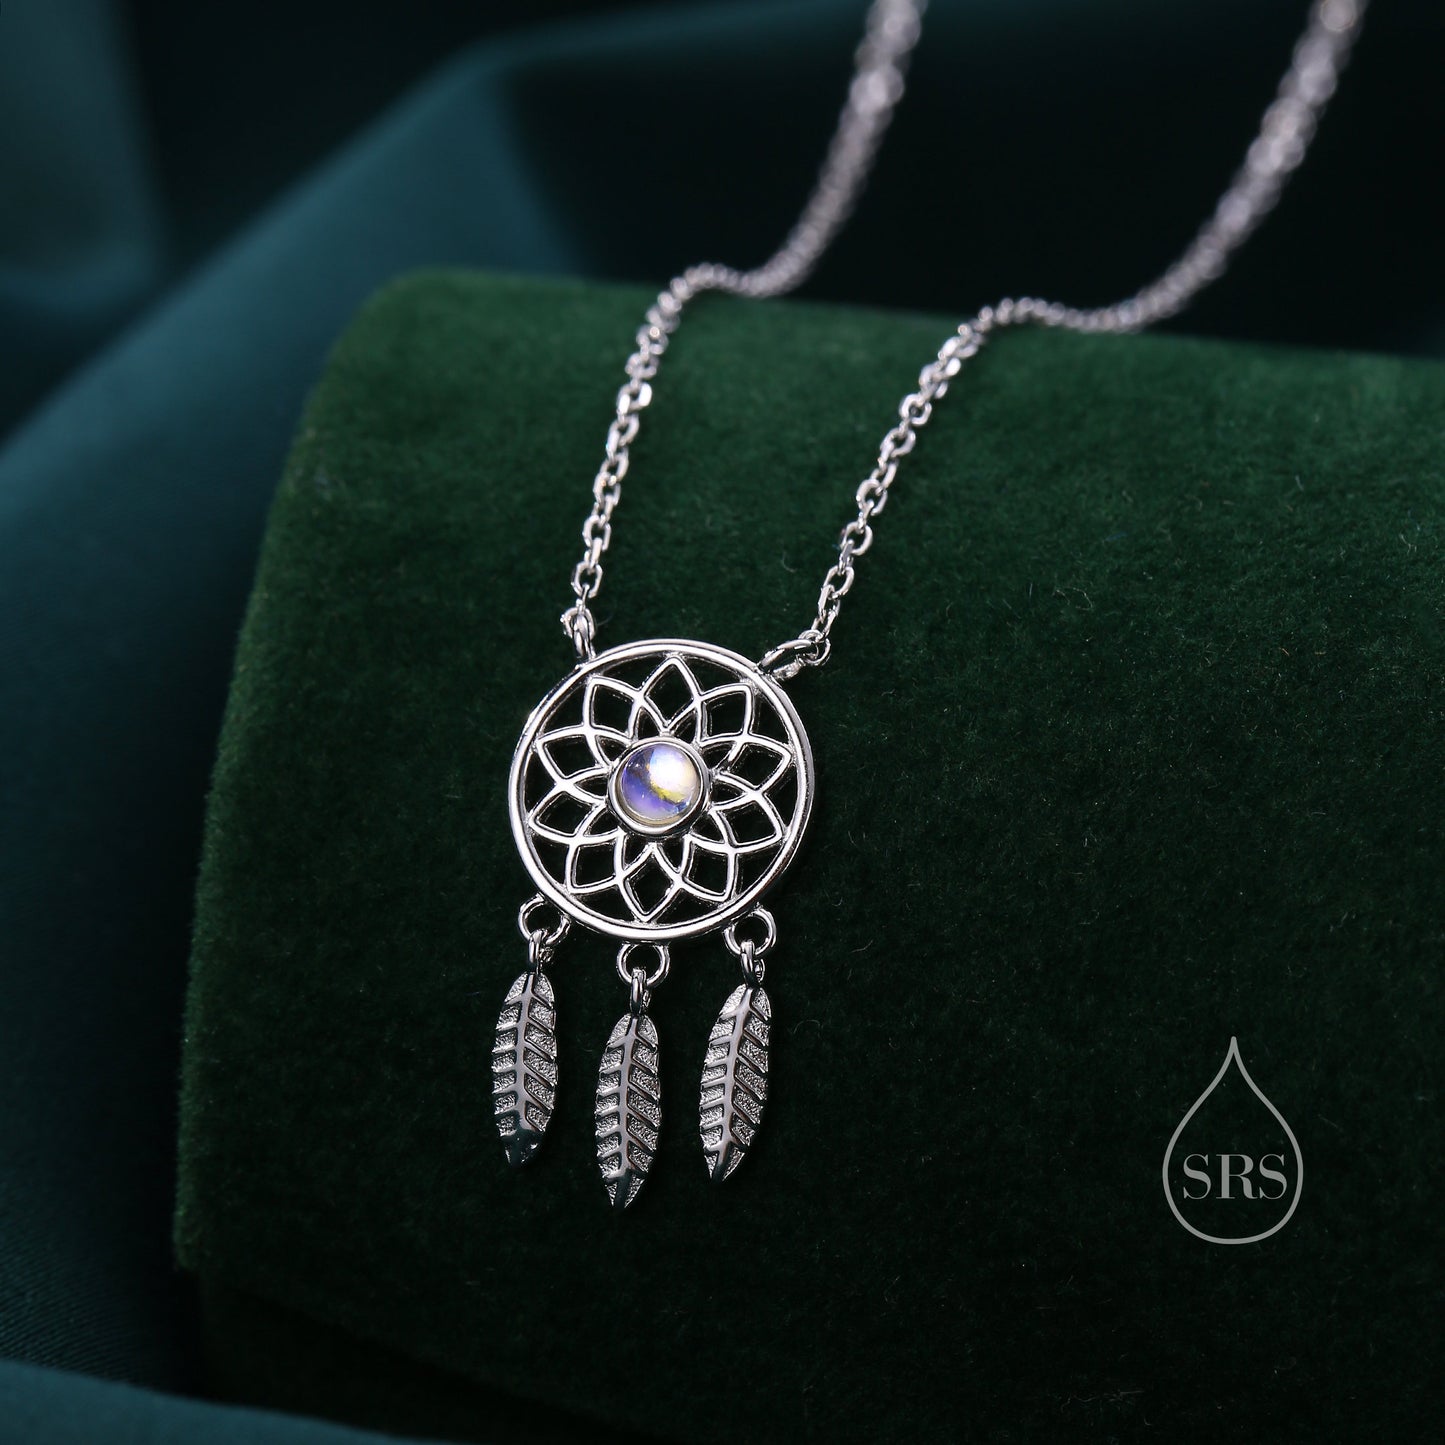 Dreamcatcher Pendant Necklace in Sterling Silver, Opal or Moonstone, Adjustable 16&#39;&#39; - 18&#39;&#39; - Cute Quirky and Fun Jewellery, Dream Catcher